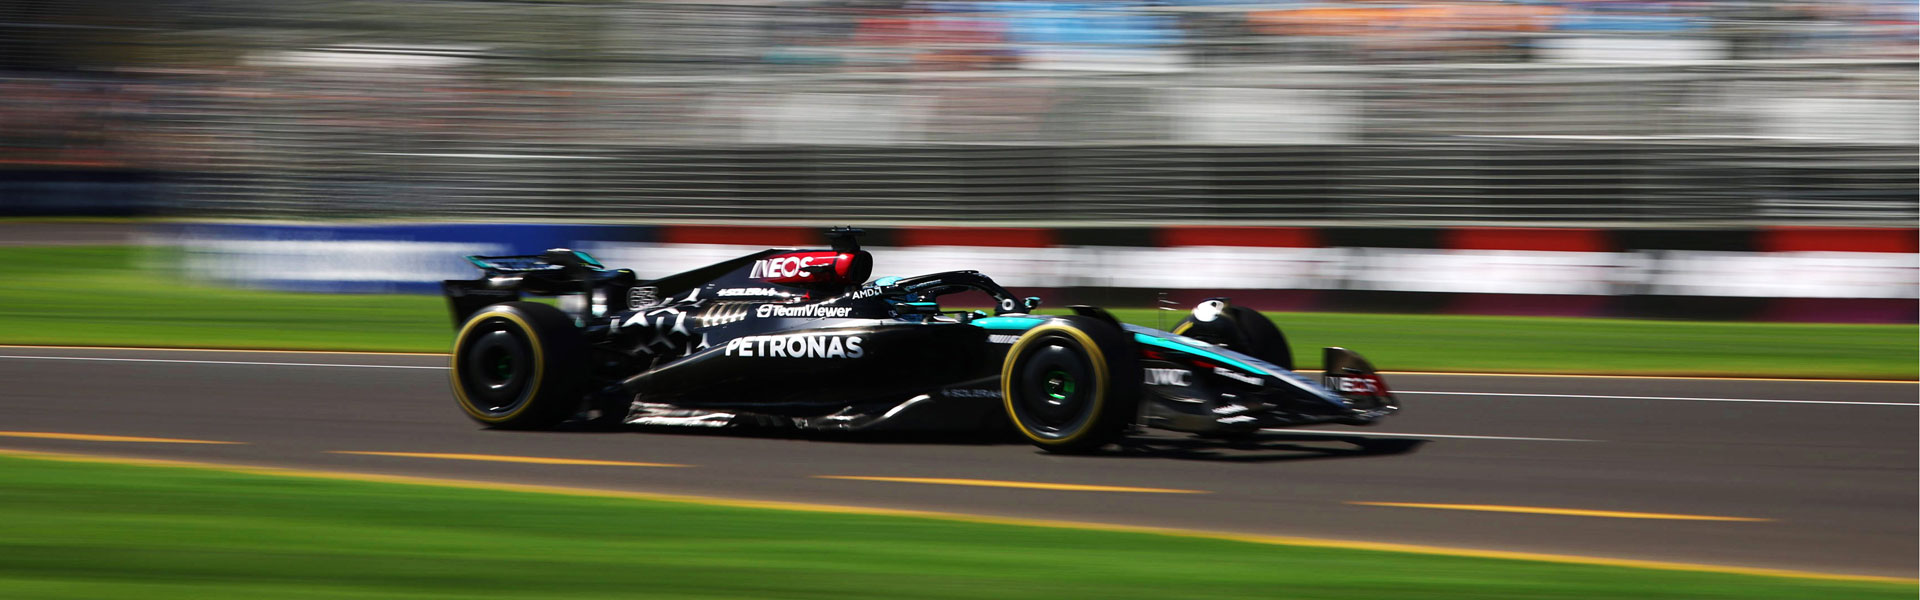 A double DNF for Mercedes at the Australian Grand Prix